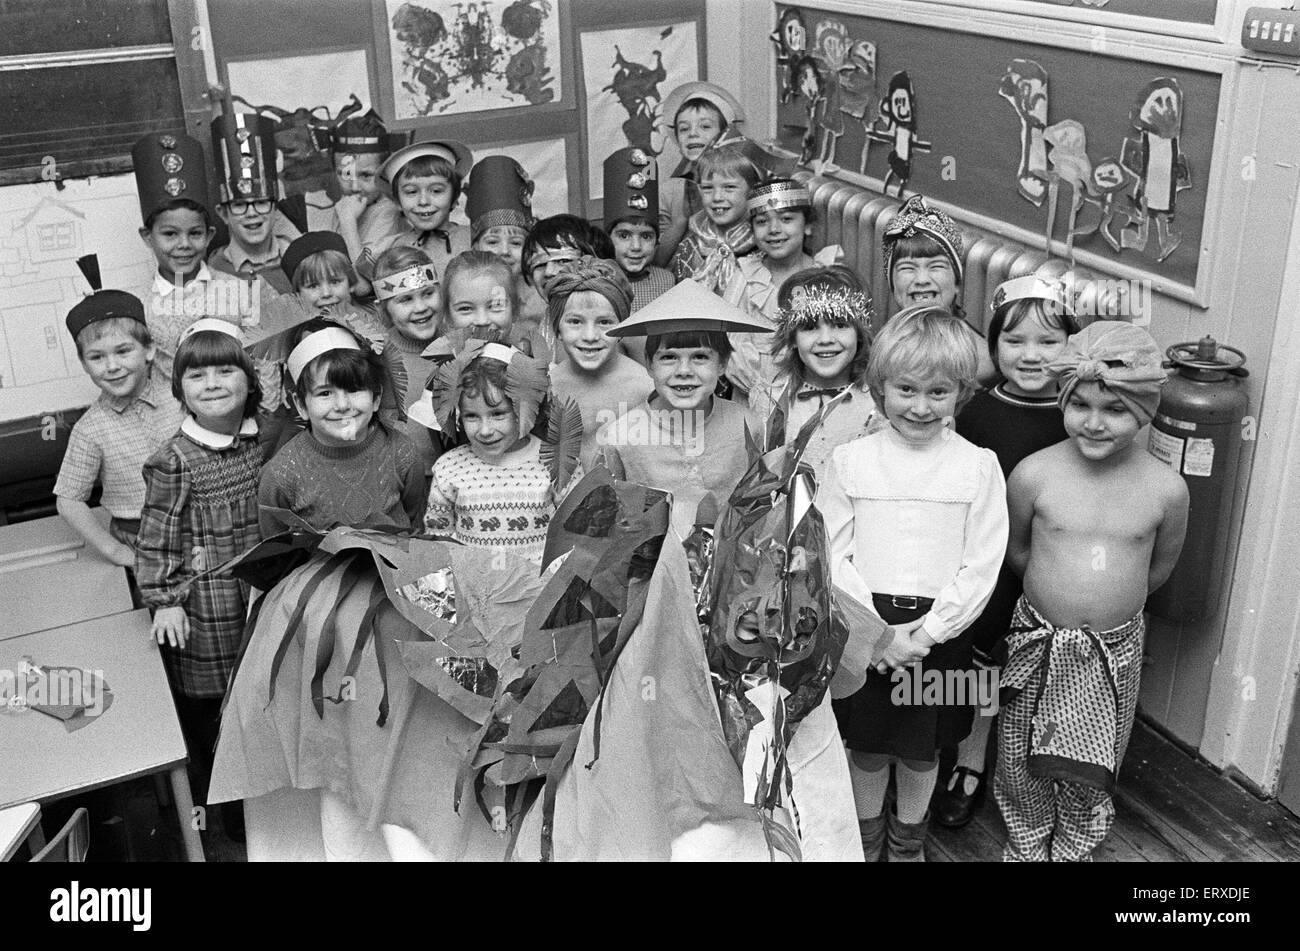 Berry Brow School Pantomime Aladdin, pictures of Aladdin and Genie. 14th December 1985. Stock Photo